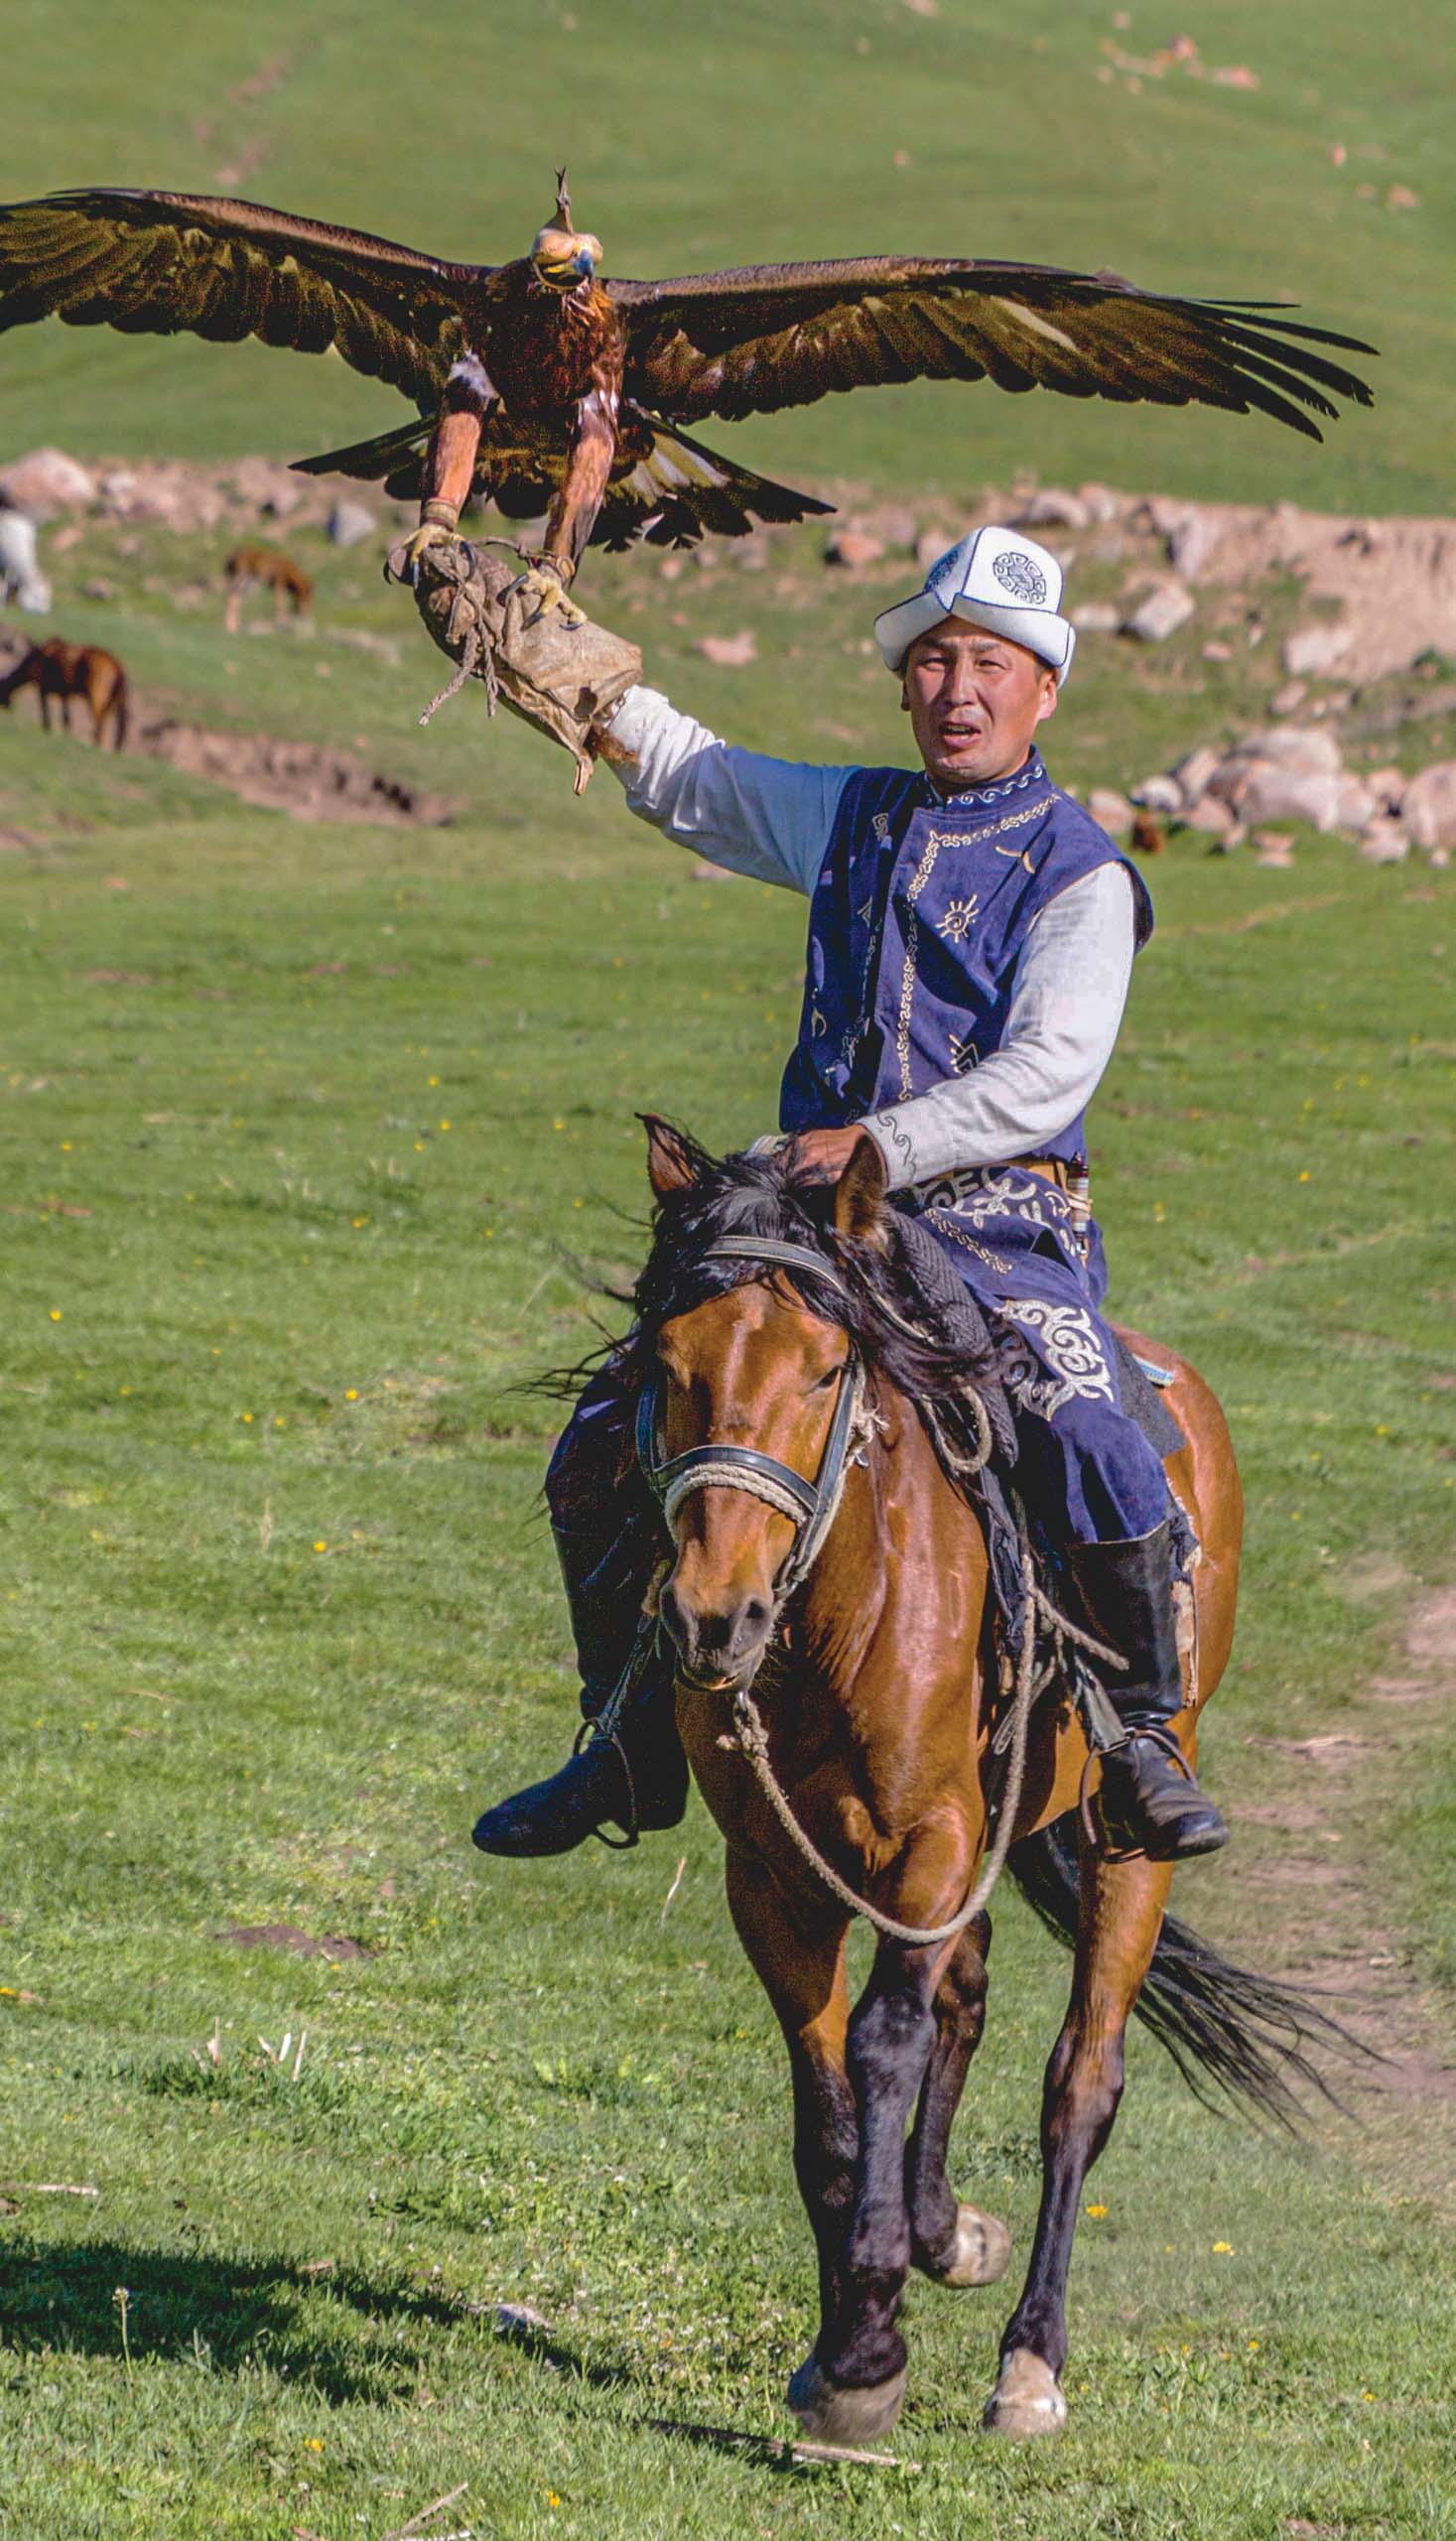 Eagle Hunter holds his eagles on horseback, ready to take flight in Kyrgyzstan.